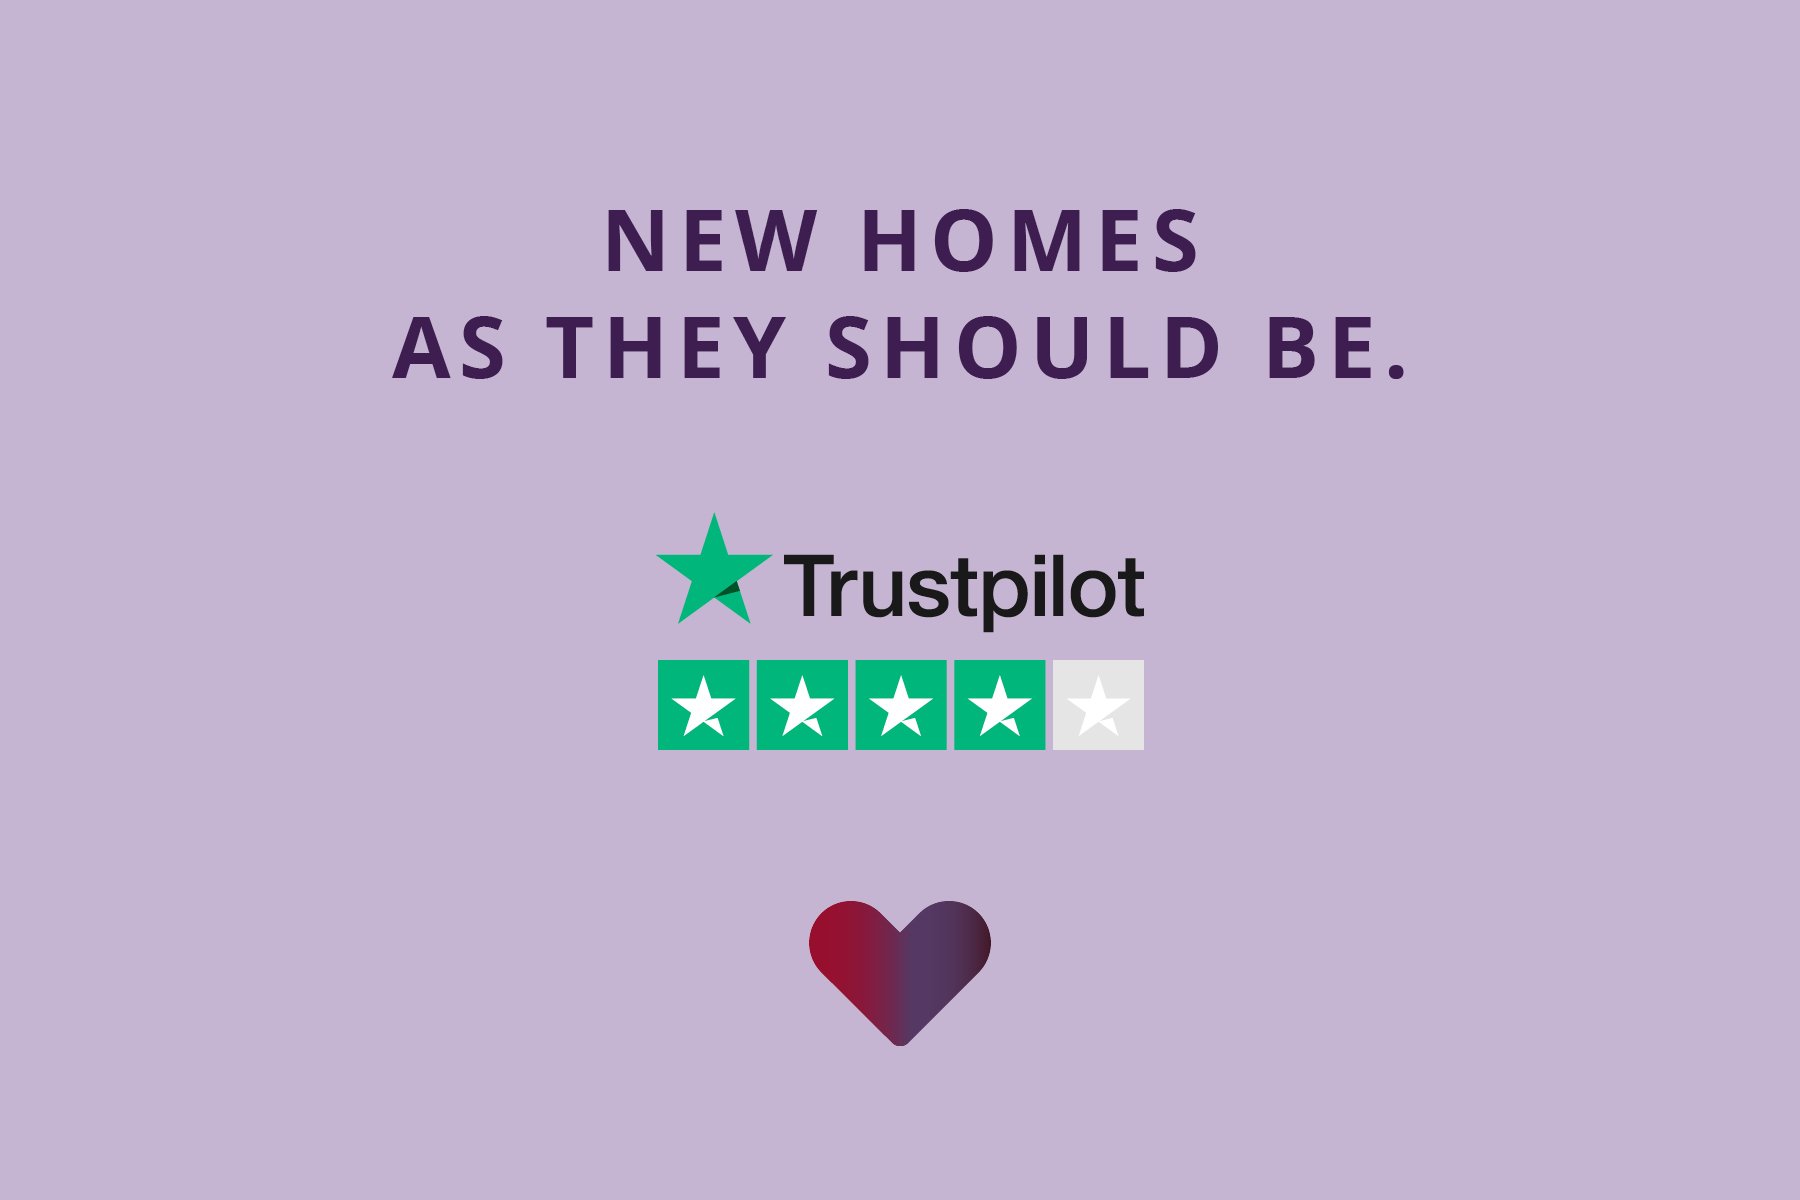 Trustpilot 'As they should be' image